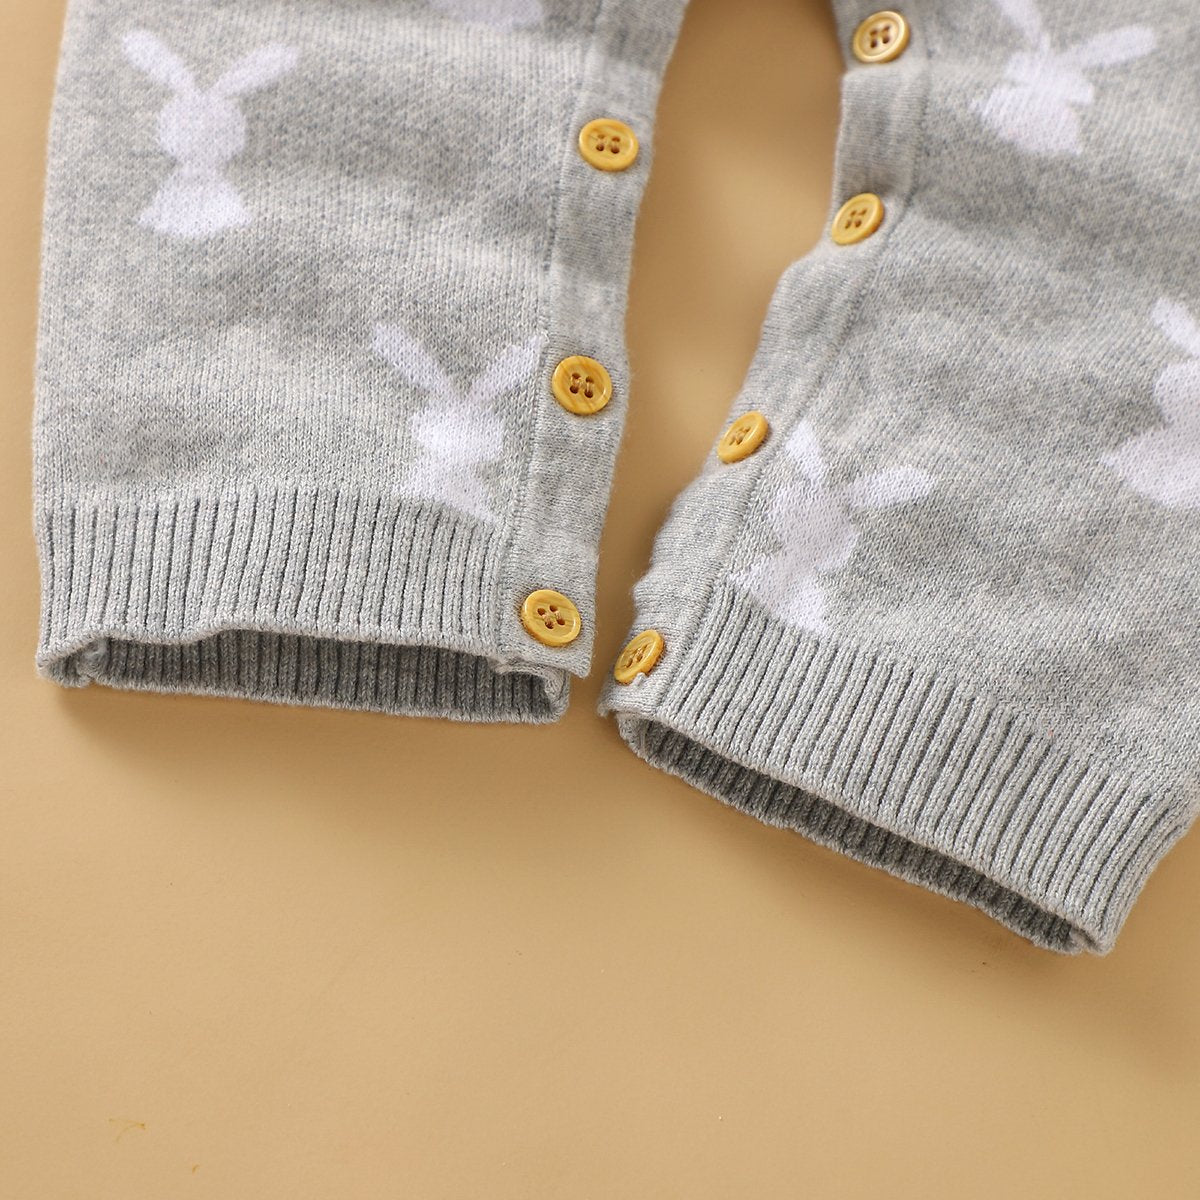 Baby Girls Cute Rabbit Jacquard One-Piece Romper Baby Clothes Wholesale Distributors